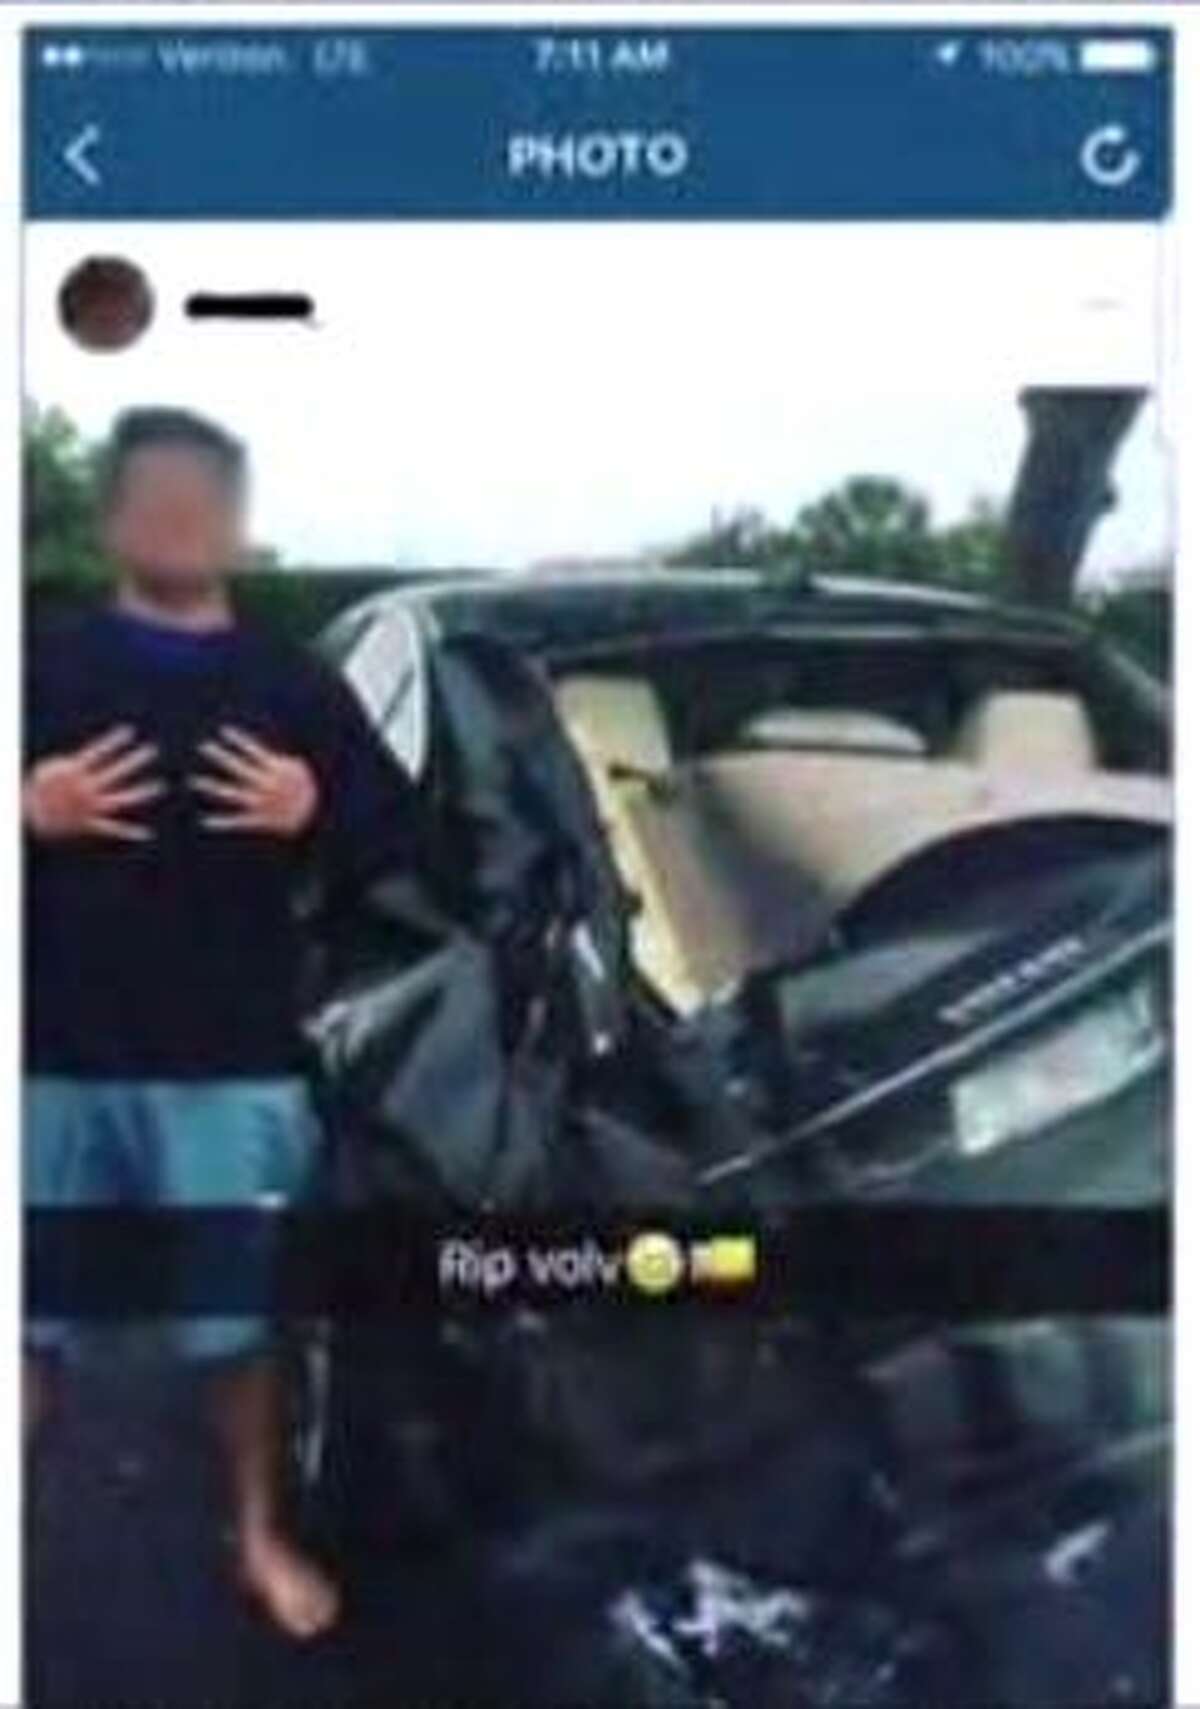 This photo was shared on Snapchat and other social media by a teen involved in a crash that killed a 53-year-old man. The victim's family is upset over the photo.